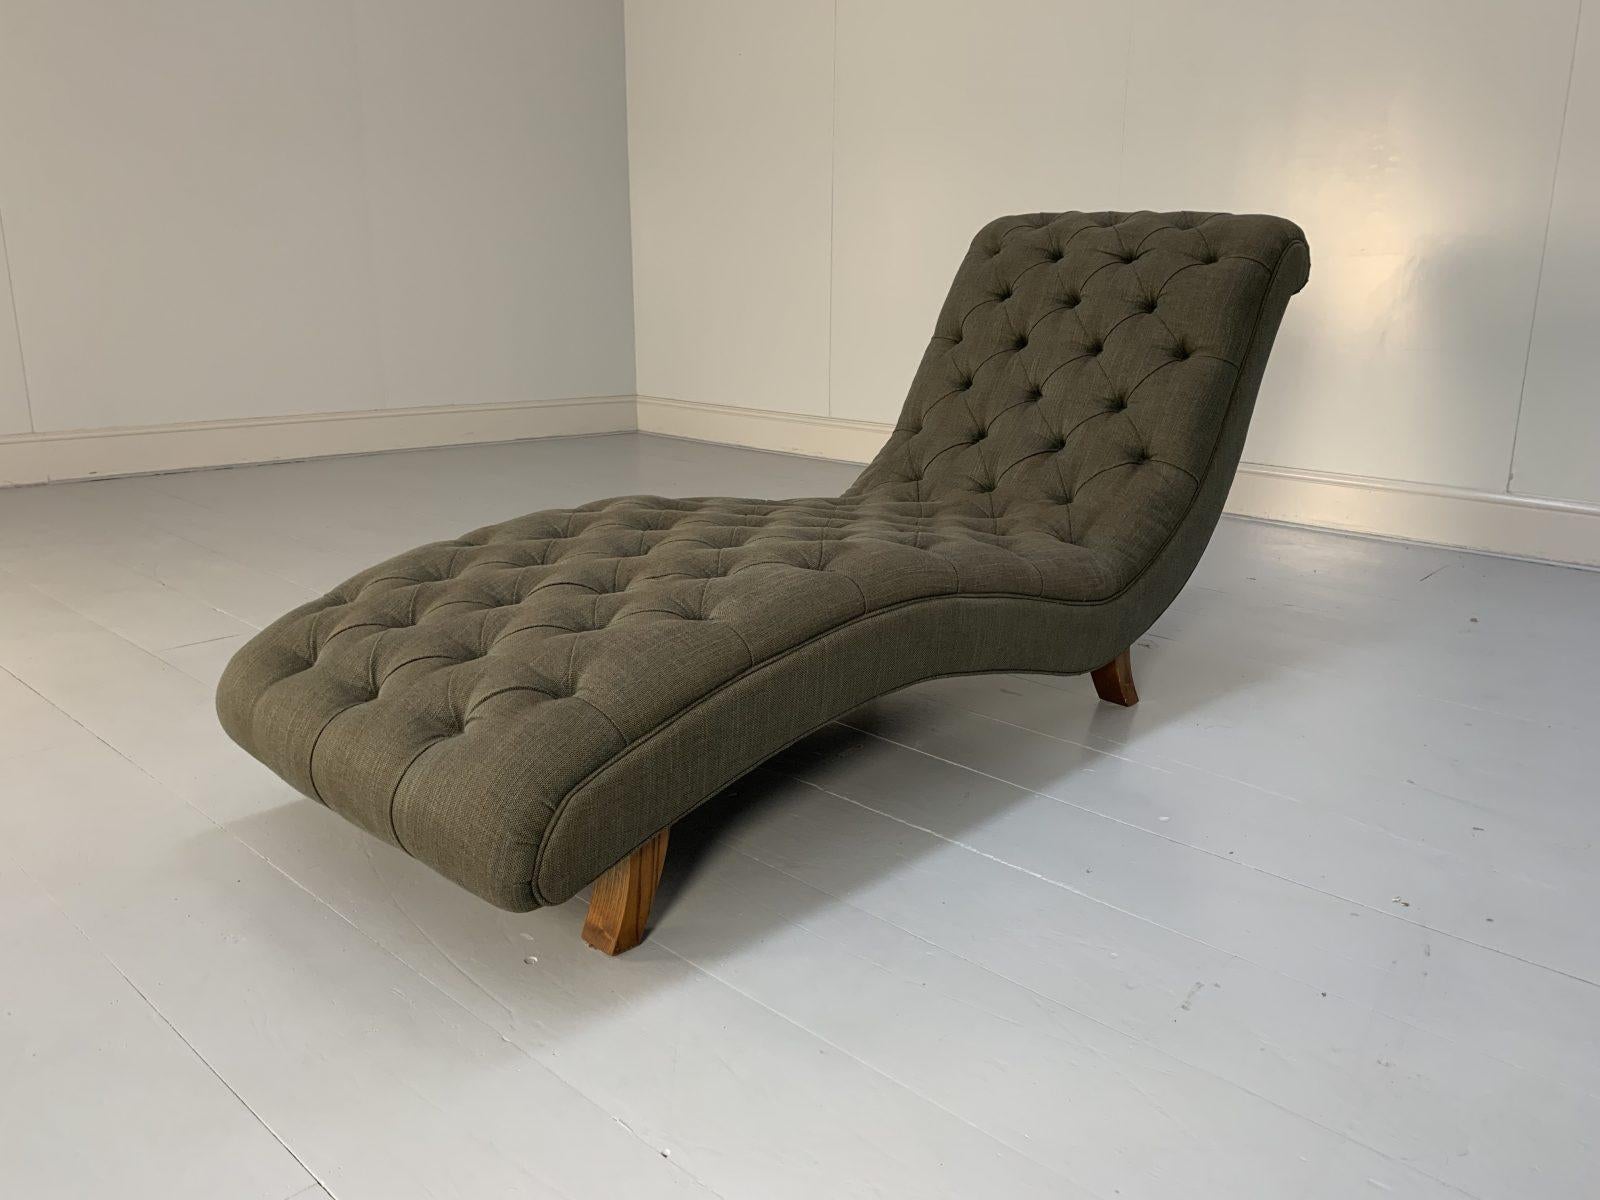 This is a rare, superb George Smith Signature “Brewster” Chaise, dressed in a peerless, elegant, top-grade and sensationally-tactile Italian woven-linen fabric in mid-grey, and with hardwood legs.

In a world of temporary pleasures, George Smith